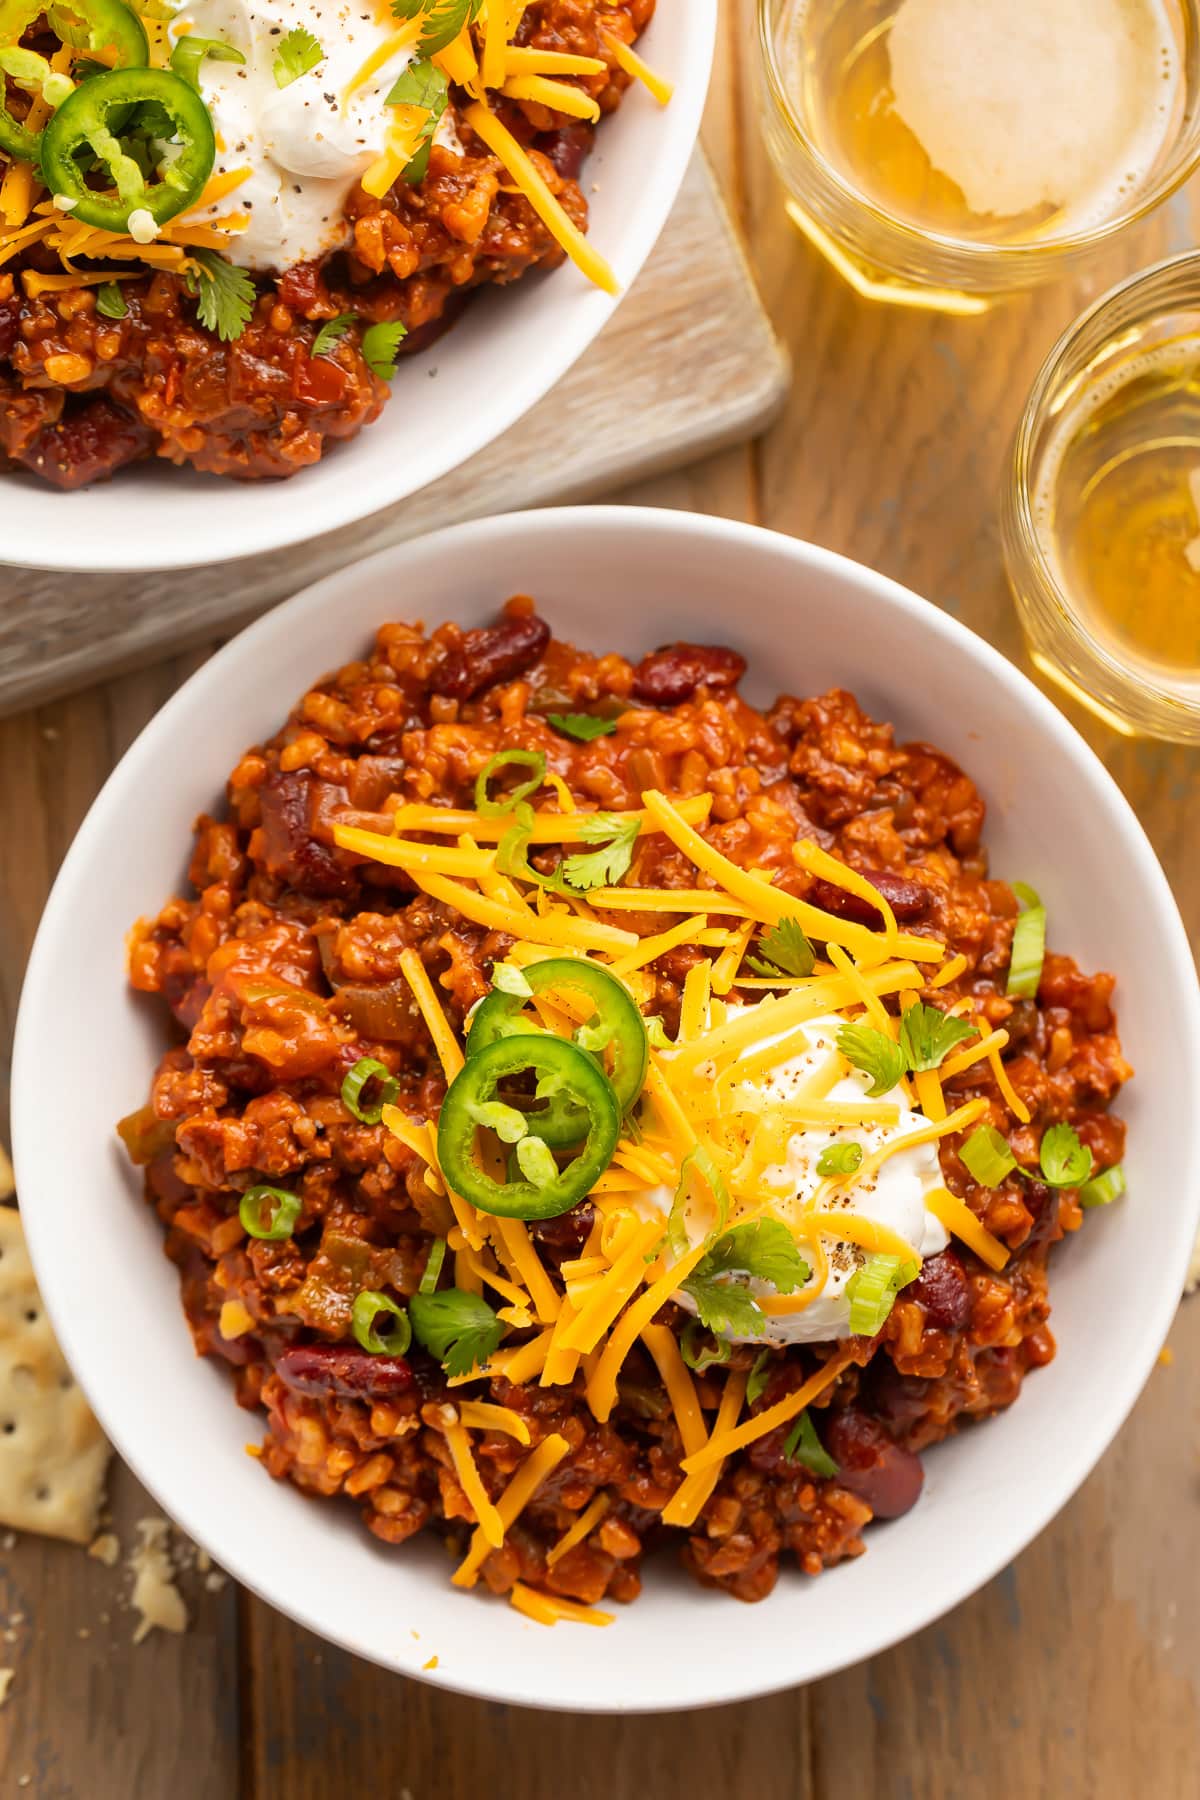 Overhead view of two large white bowls containing deep red chili, mixed with rice and topped with sour cream and shredded cheese.